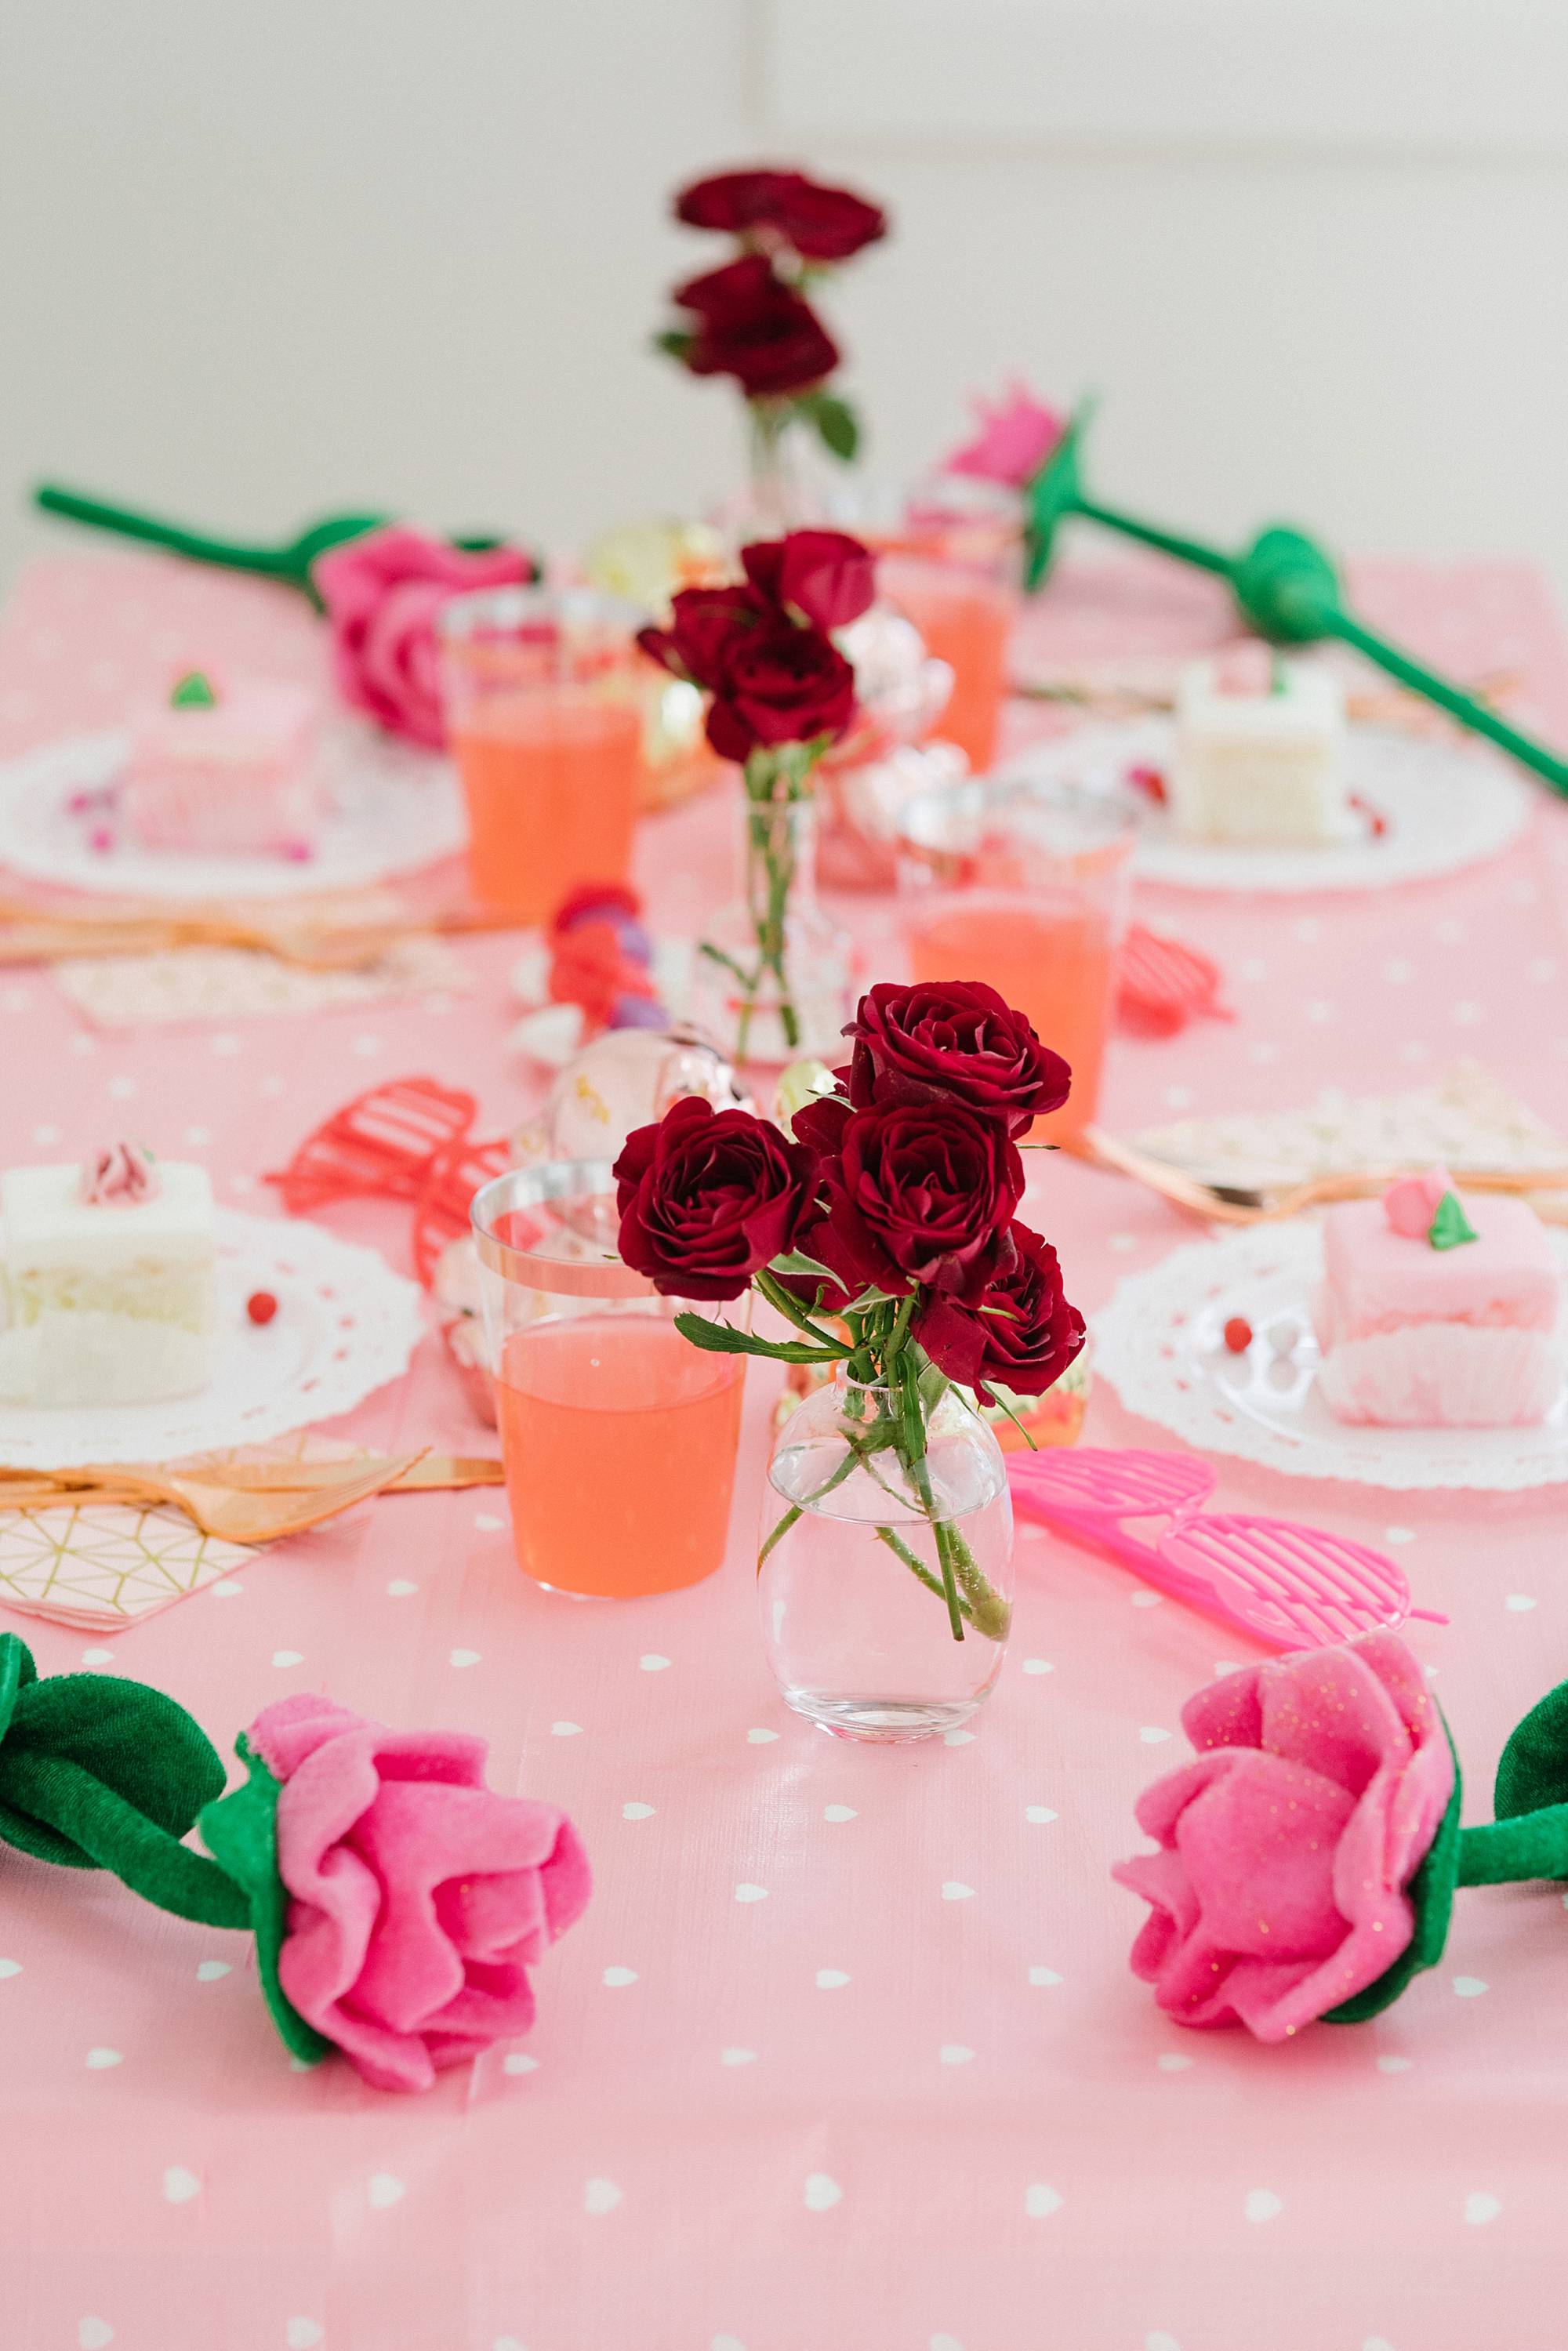 the 99 cents store Valentine's Day galentine's day decor from the 99 cents only store - a party on a budget cute girly and fun! #valentinesday #galentinesday